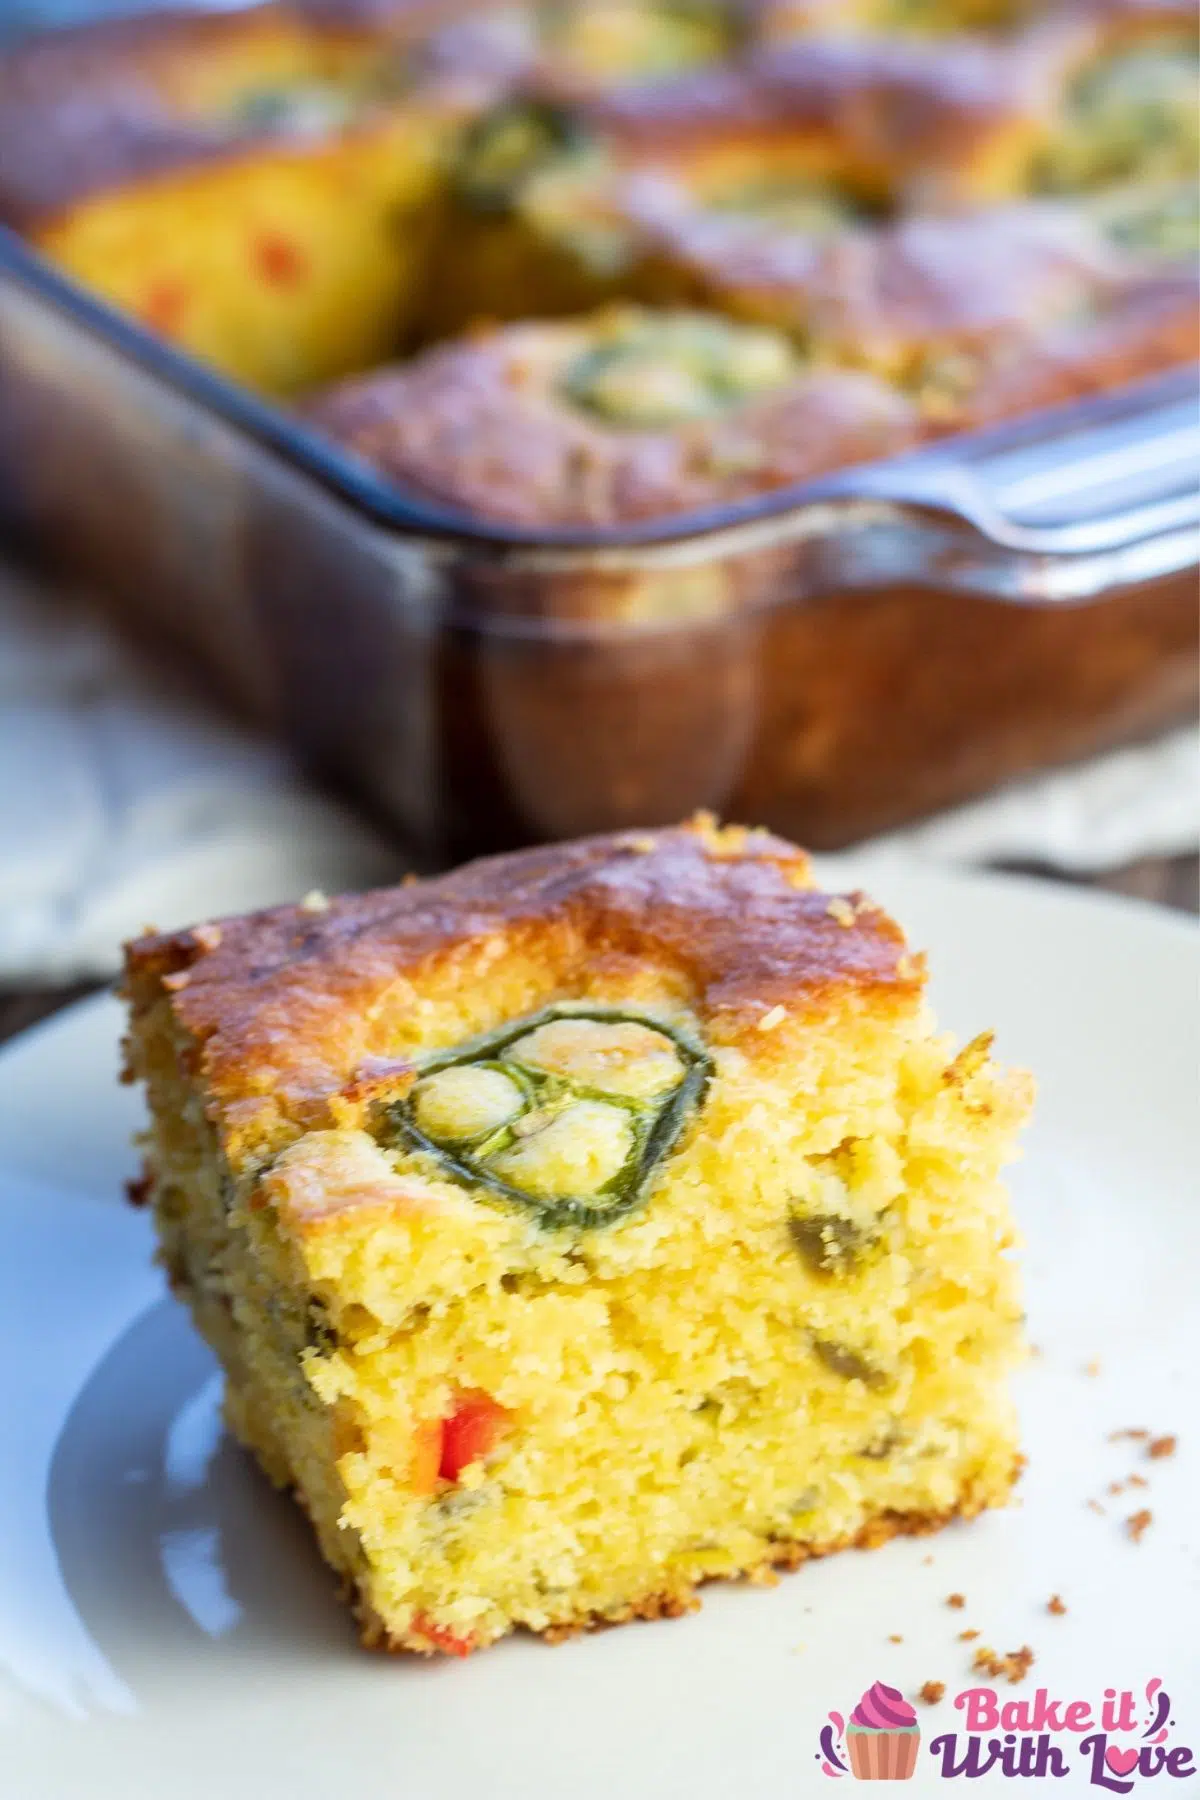 Tall image of a single sliced jiffy jalapeno cornbread square and pan in background.